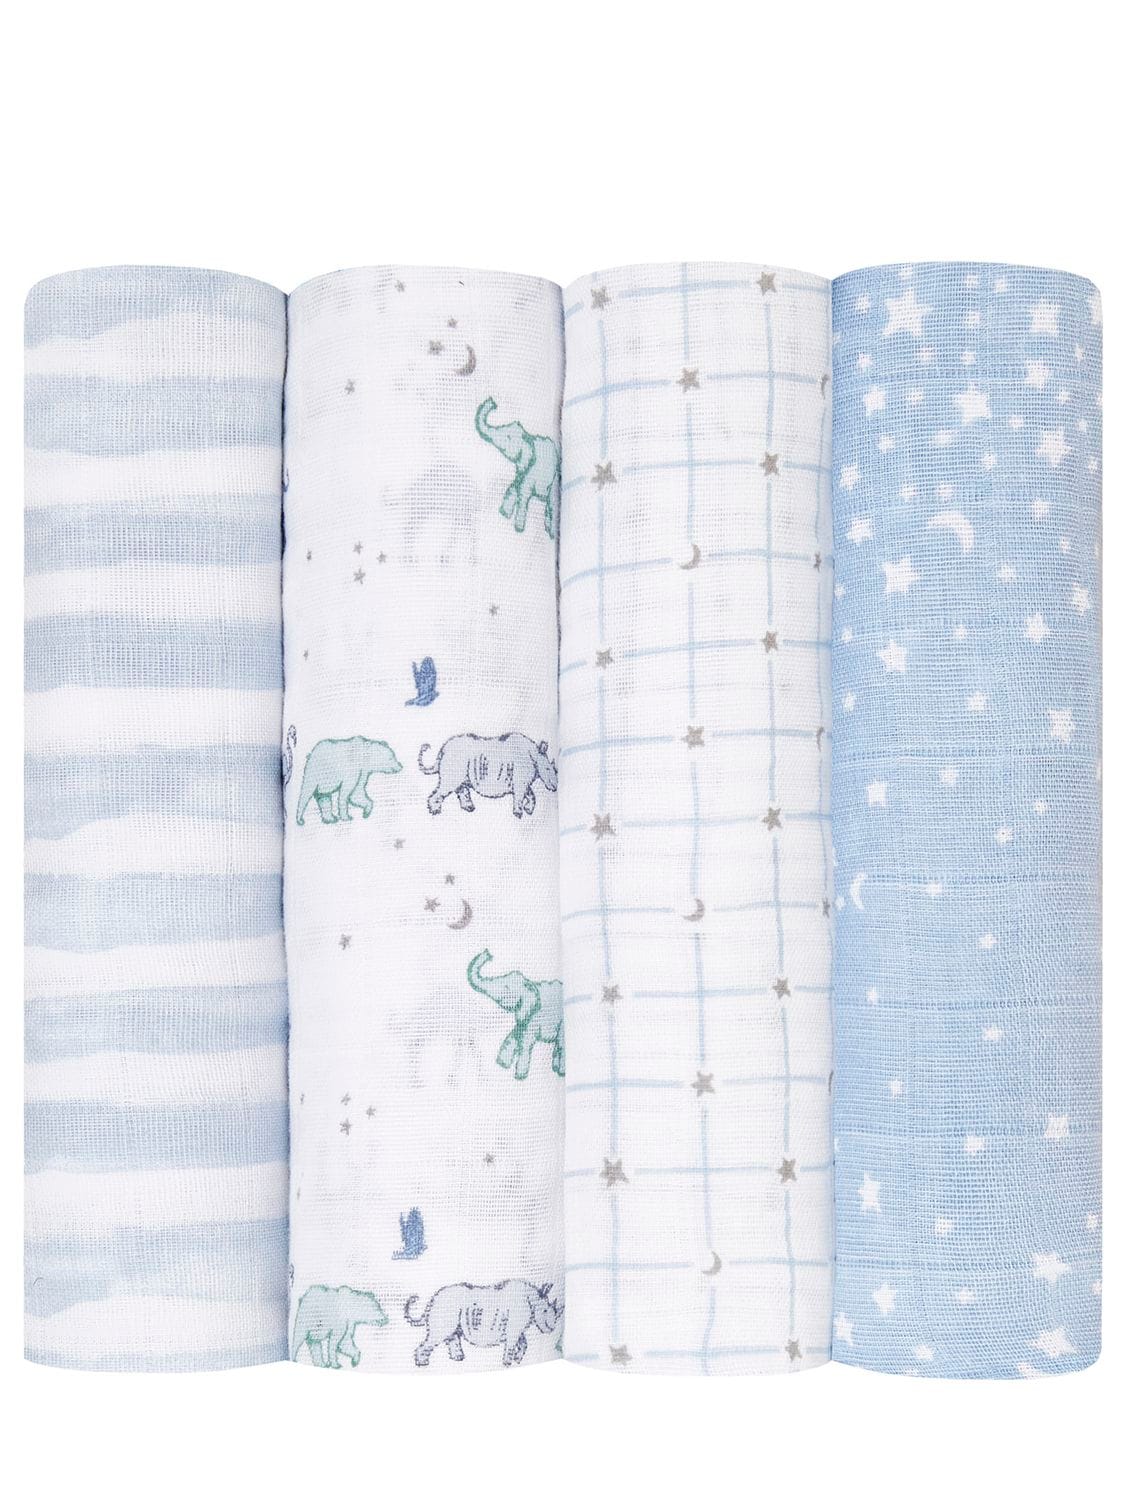 Aden + Anais Set Of 4 Organic Cotton Muslin Swaddles In Blue